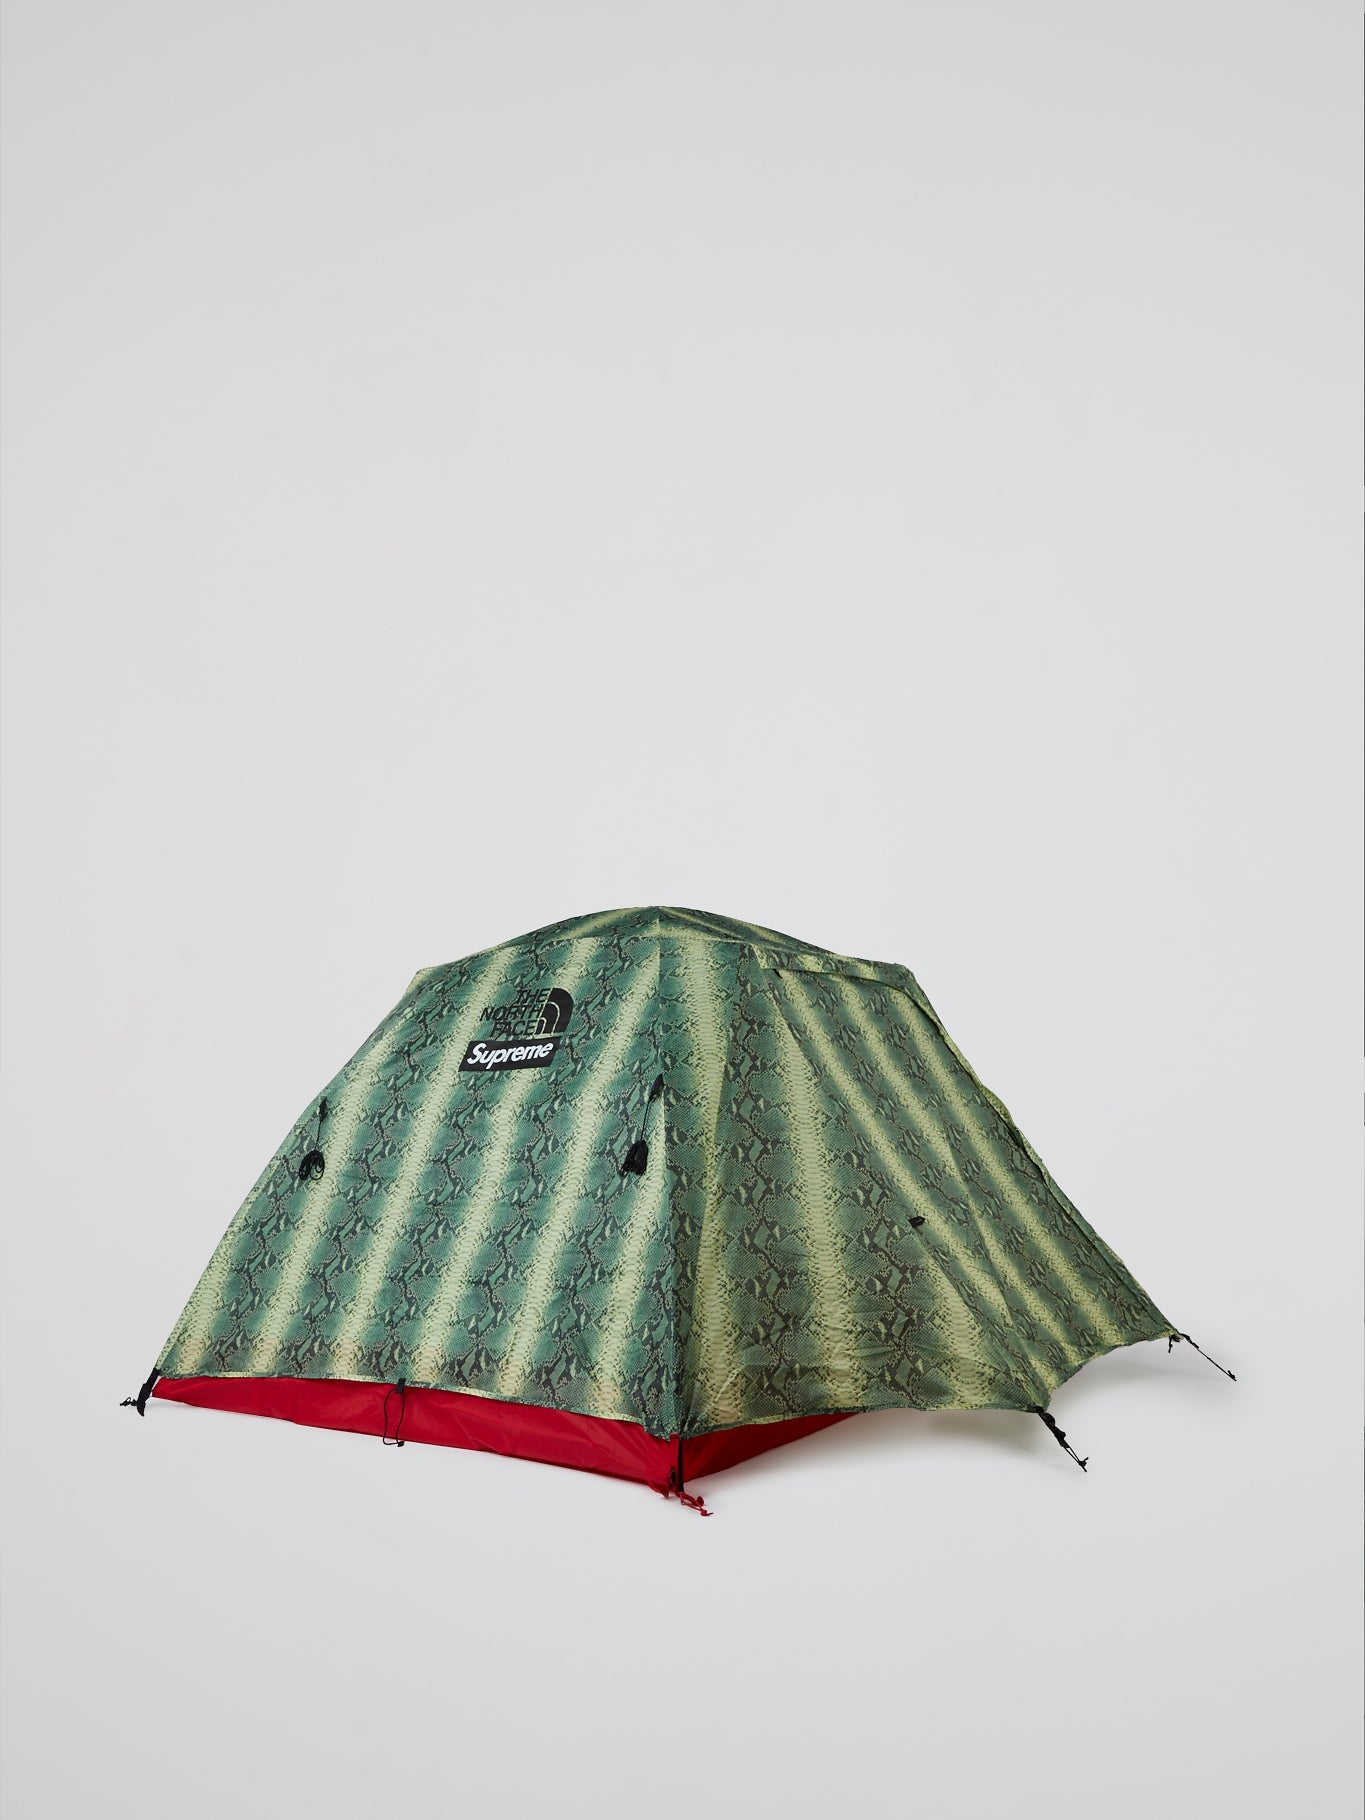 Supreme x The North Face Green Snakeskin Stormbreak Tent